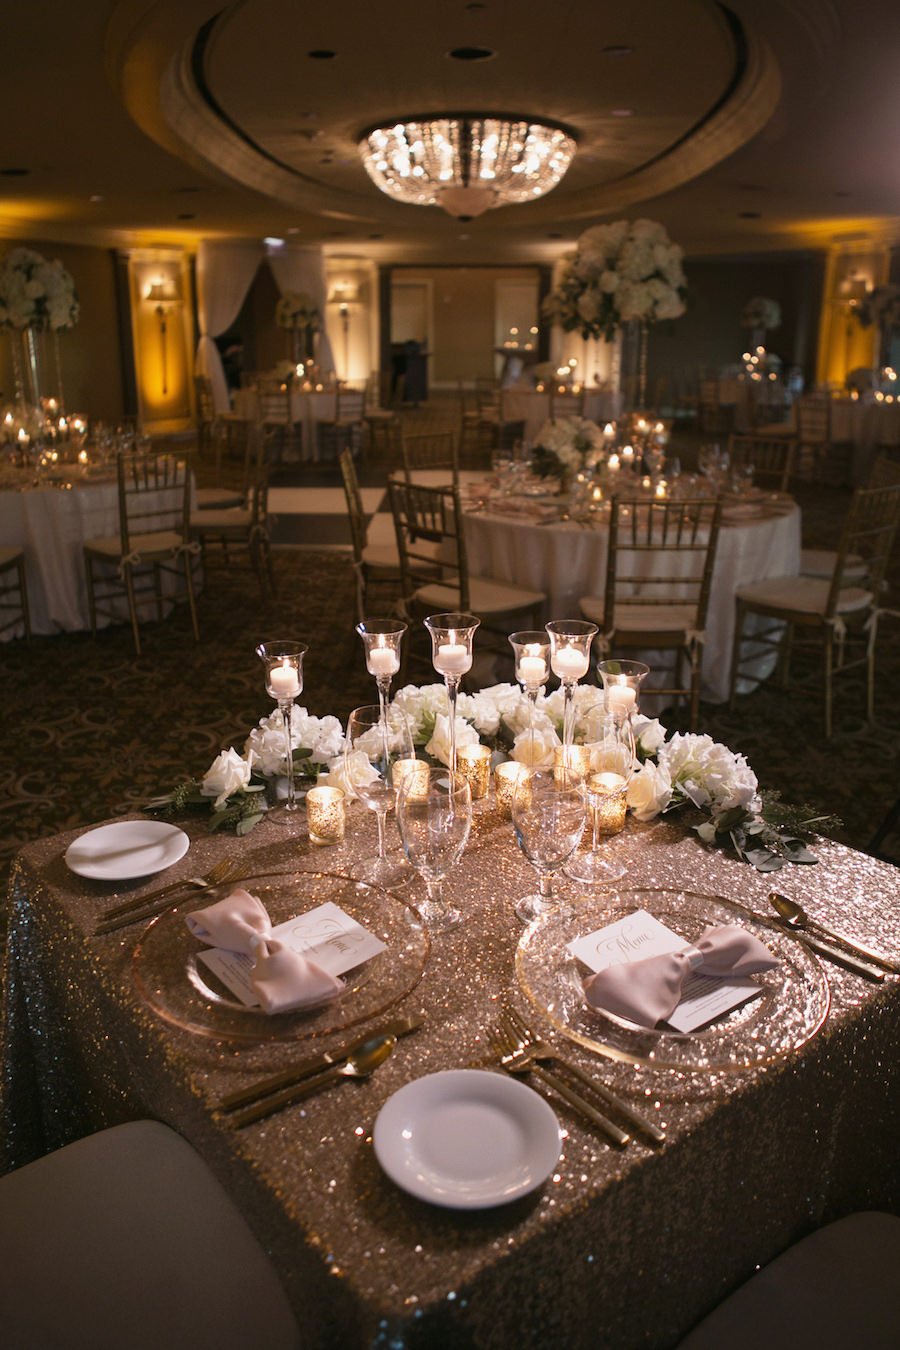 Gold and Ivory Wedding Sweetheart Table with Gold Glitter Linens and White Roses with Gold Mercury Tea Light Candles and Medium Tea Light White Candles in Glass Candle Holders with Gold Chiavari Chairs | Tampa Wedding Rentals A Chair Affair | Tampa Wedding Linens Gabro Event Services | Wedding Venue The Tampa Club | Wedding Photographer Carrie Wildes Photography | Tampa Bay Wedding Florist Northside Florist